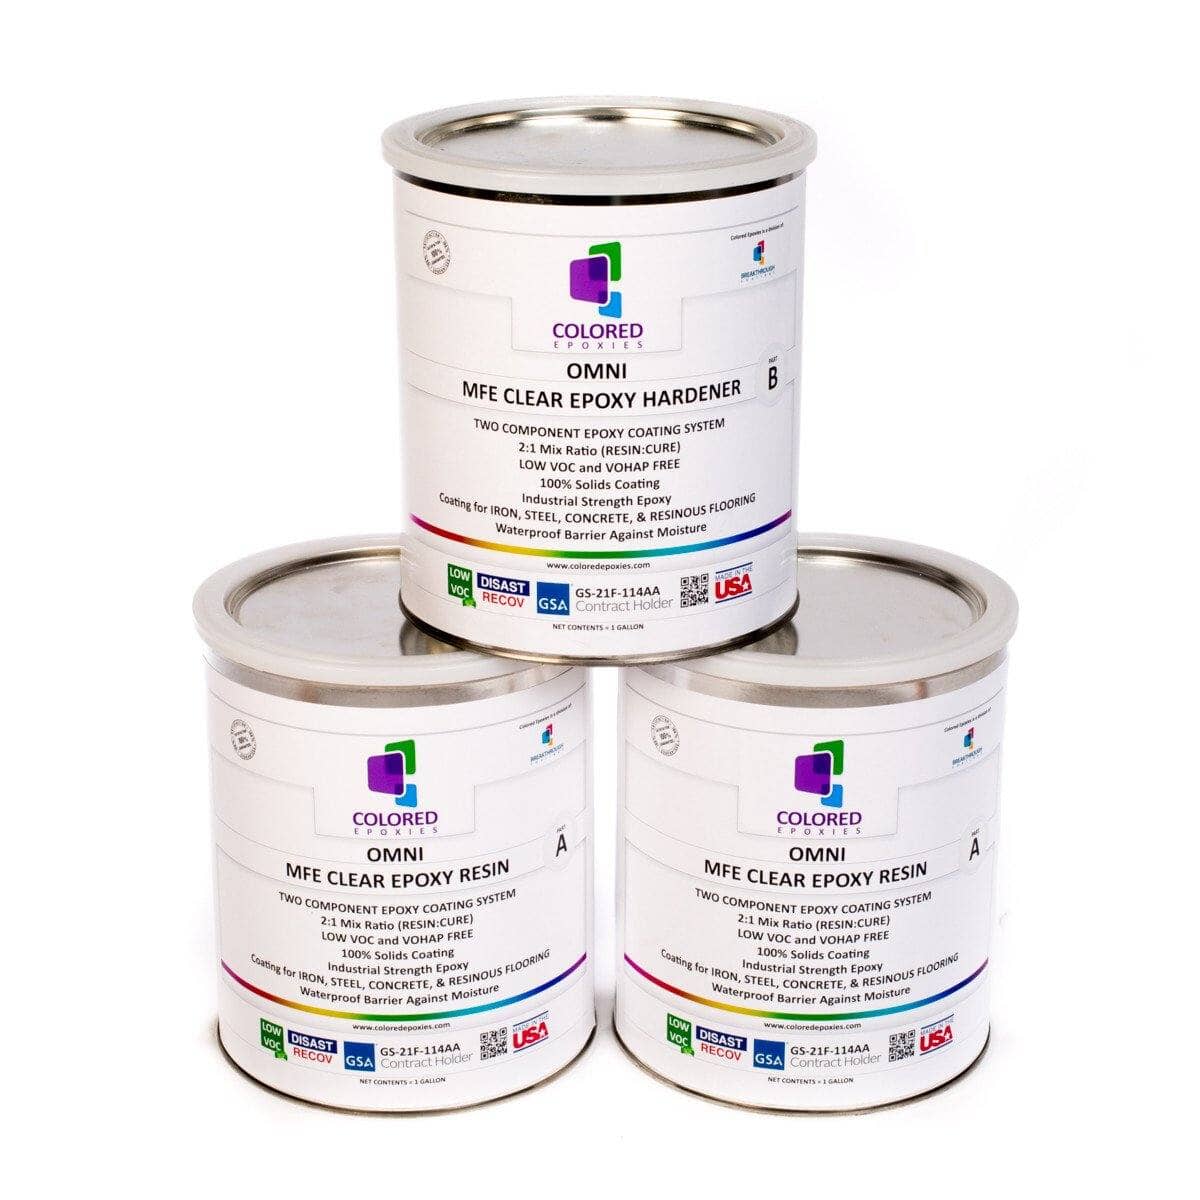 Coloredepoxies 10025 White Epoxy Resin Coating Made with Beautiful and  Vibrant Pigments, 100% solids, For Garage Floors, Basements, Concrete and